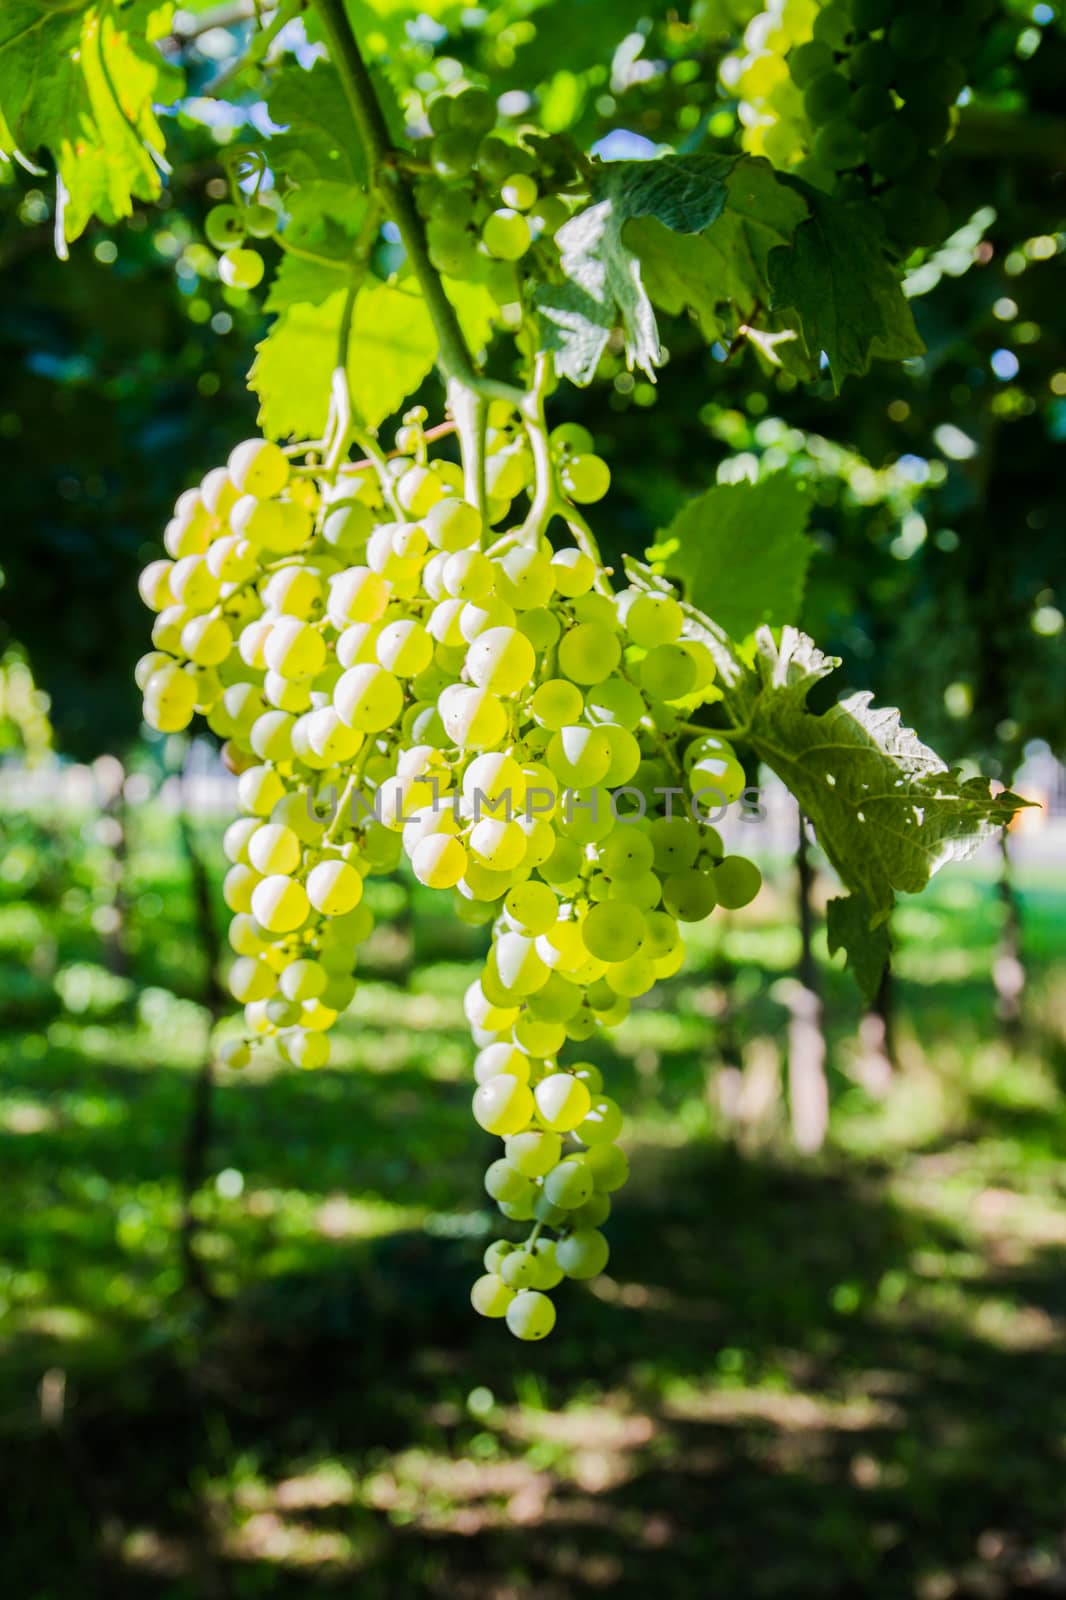 Bunch of grapes ready to be harvested in the Italian vineyards.